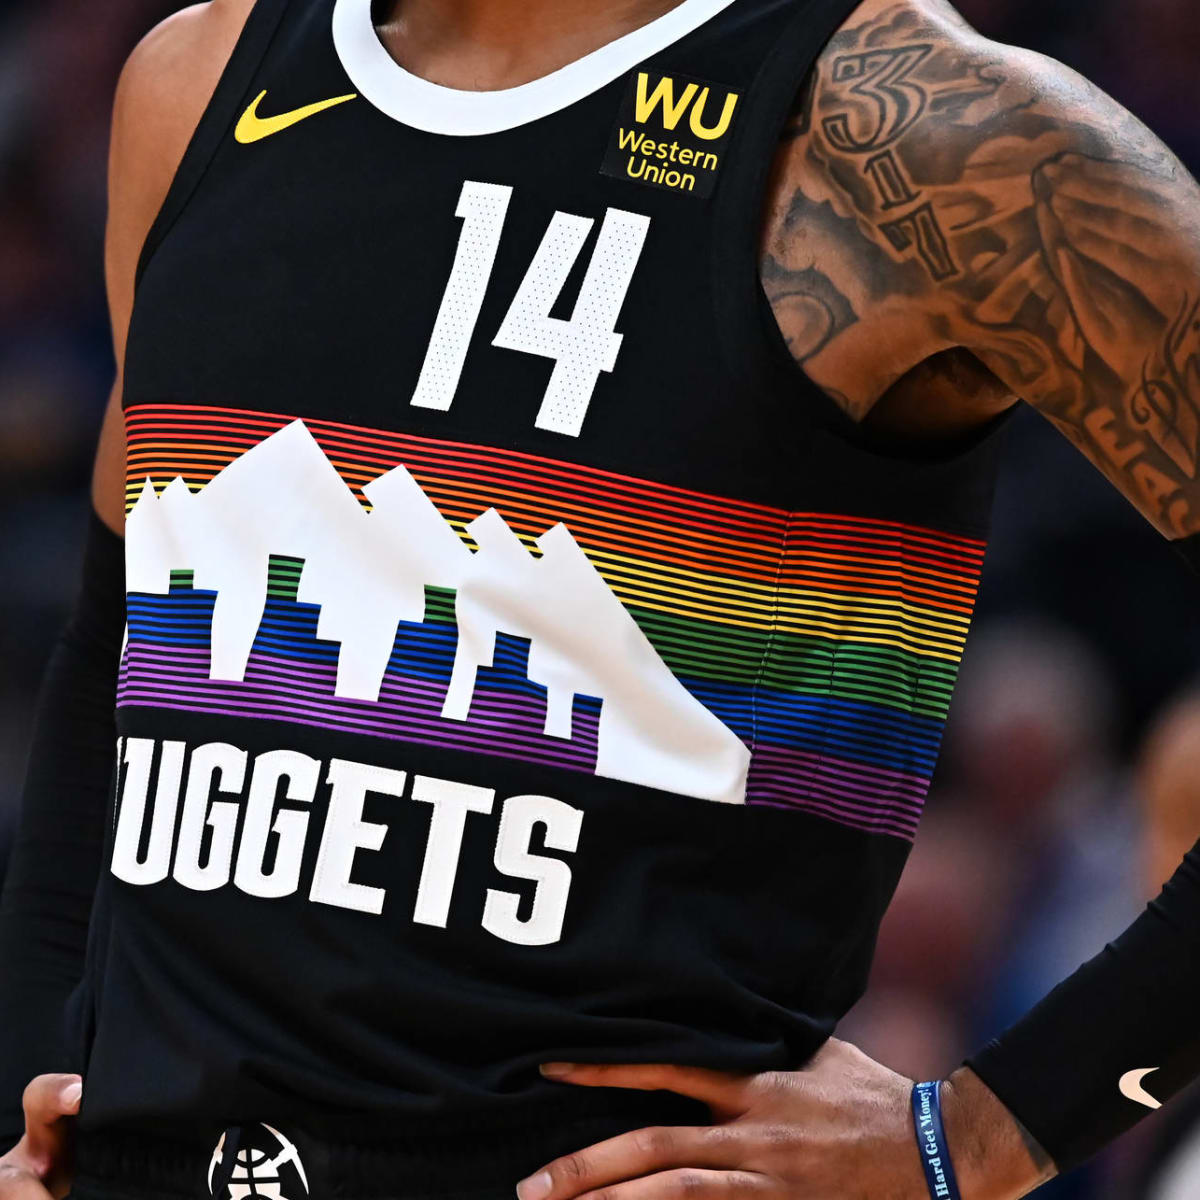 Ads on NBA Jerseys Are About to Become Extremely Common - Racked